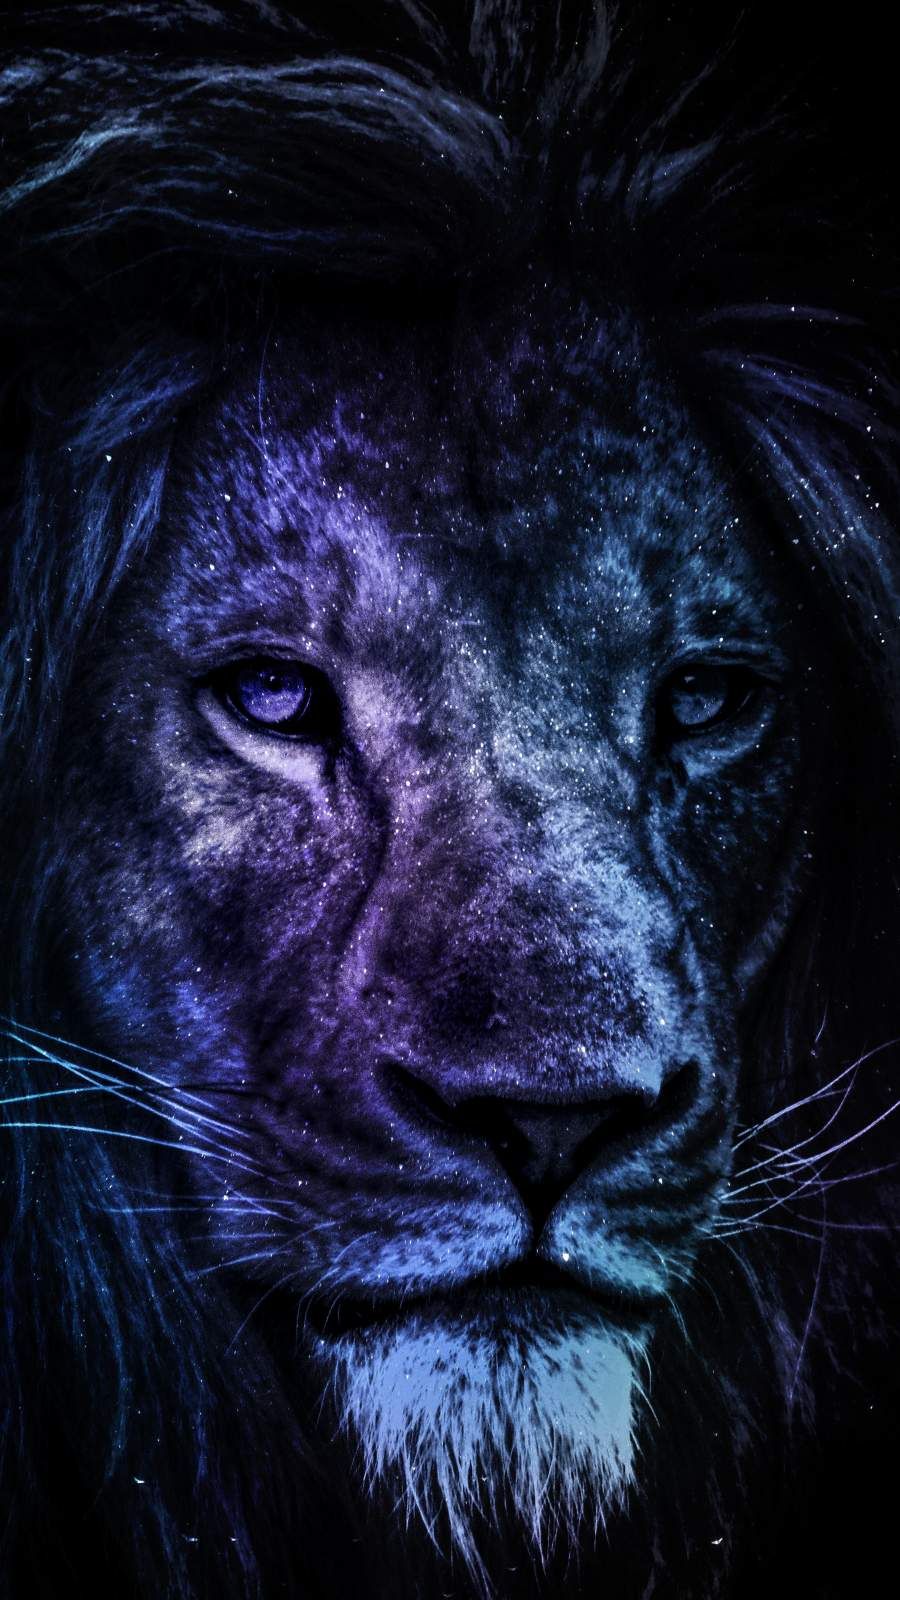 iPhone Wallpaper for iPhone iPhone 8 Plus, iPhone 6s, iPhone 6s Plus, iPhone X and iPod. Lion wallpaper iphone, Lion HD wallpaper, Cool background for iphone